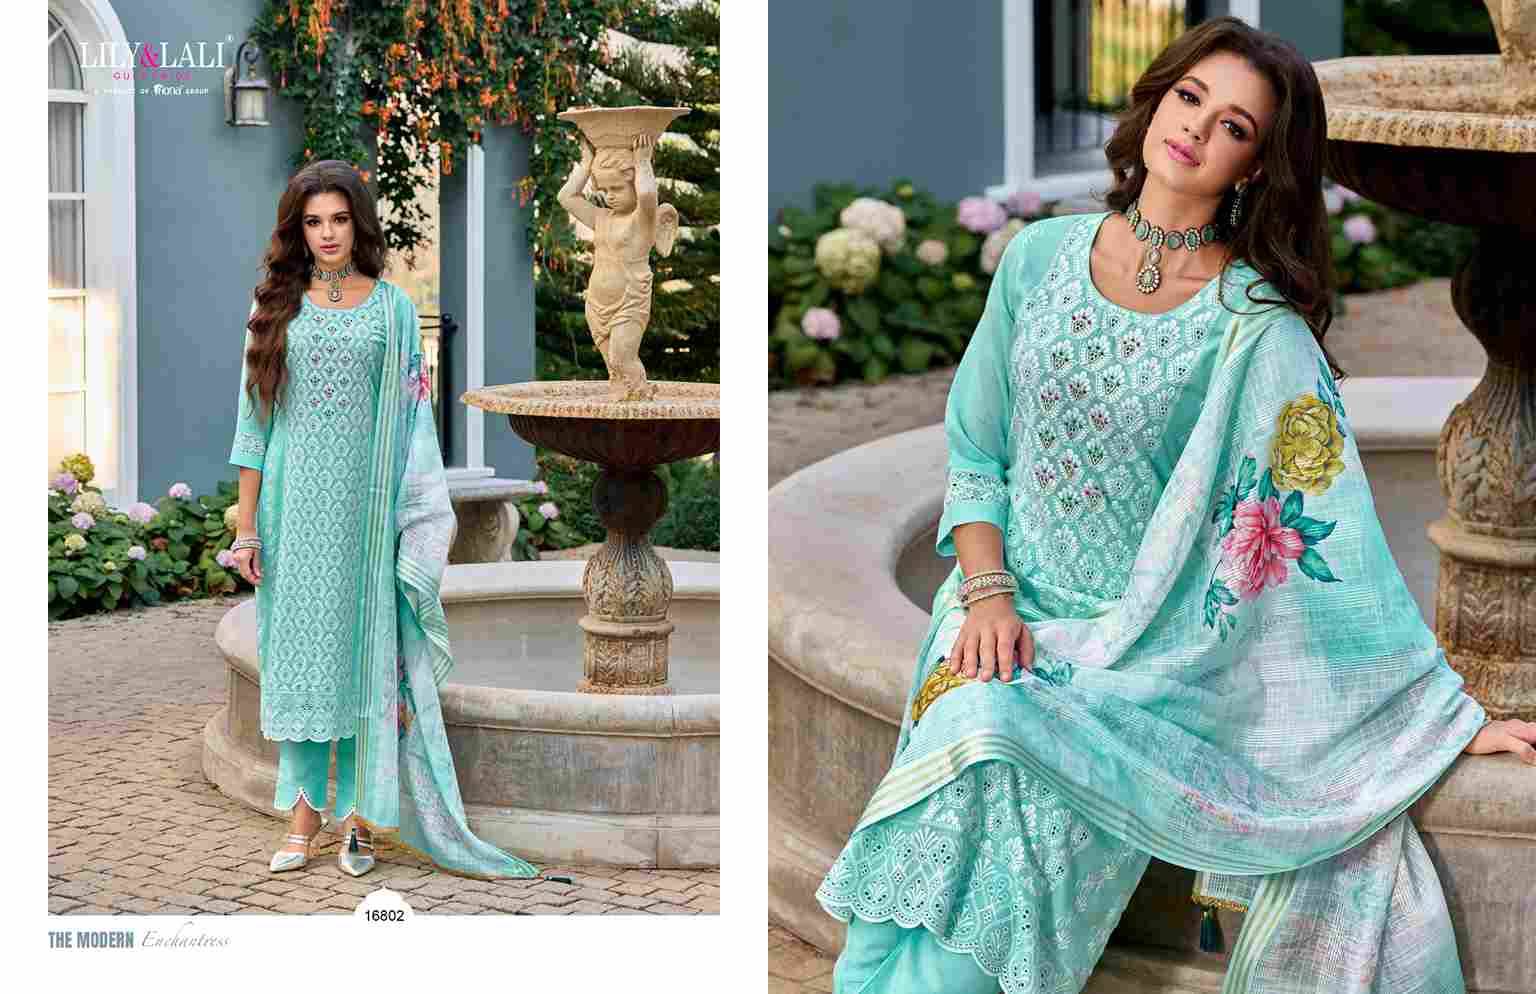 Cotton Carnival By Lily And Lali 16801 To 16806 Series Beautiful Festive Suits Colorful Stylish Fancy Casual Wear & Ethnic Wear Cambric Cotton Dresses At Wholesale Price